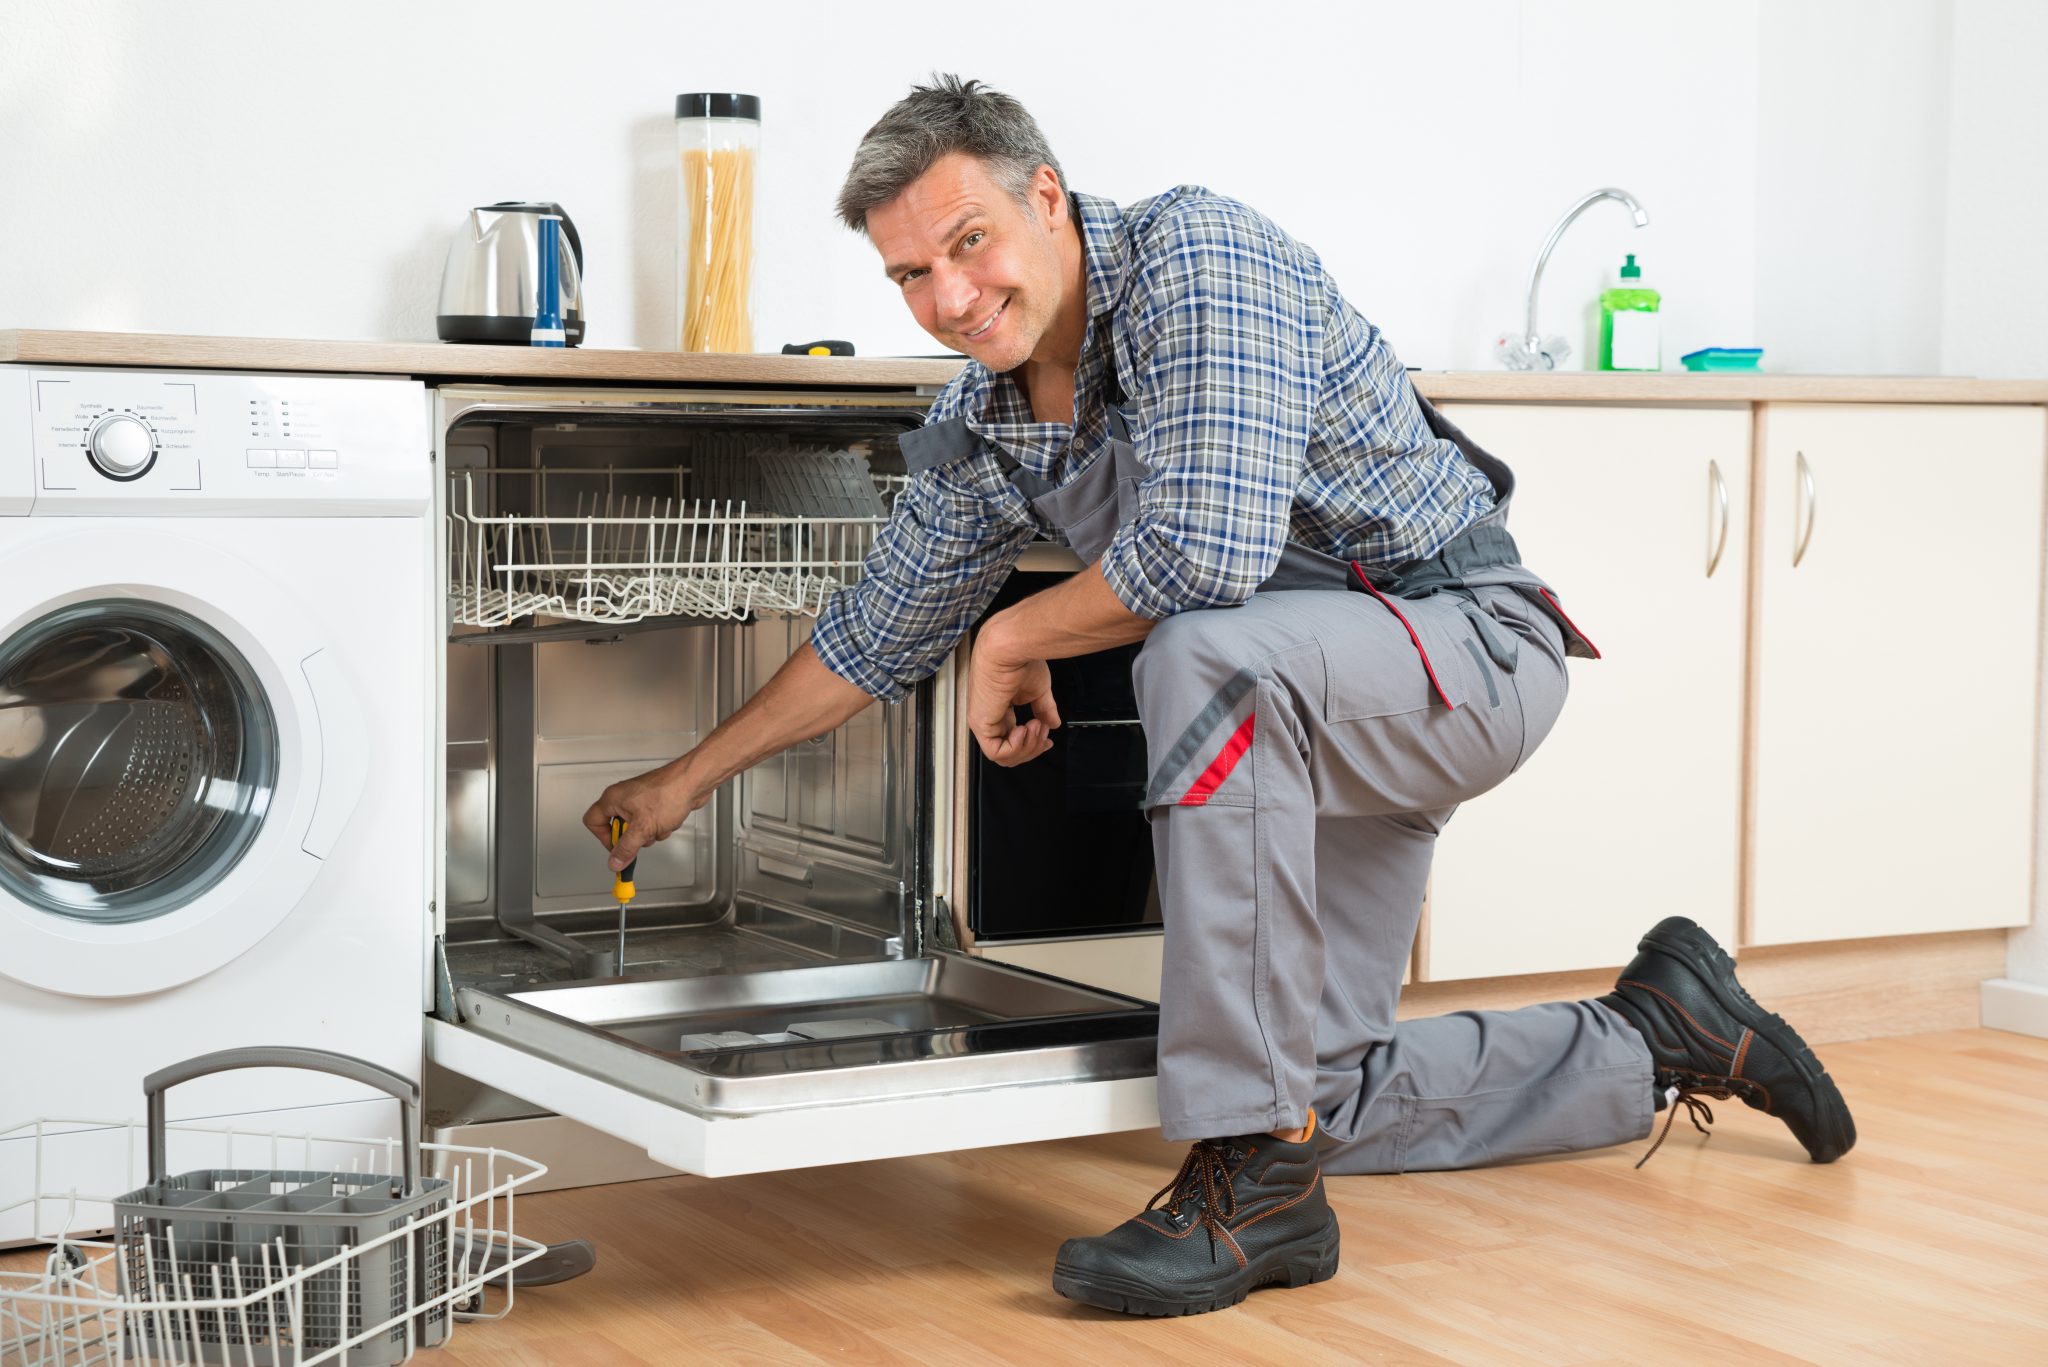 Best Dishwasher Repair In Dubai gives the right solutions for appliance repair